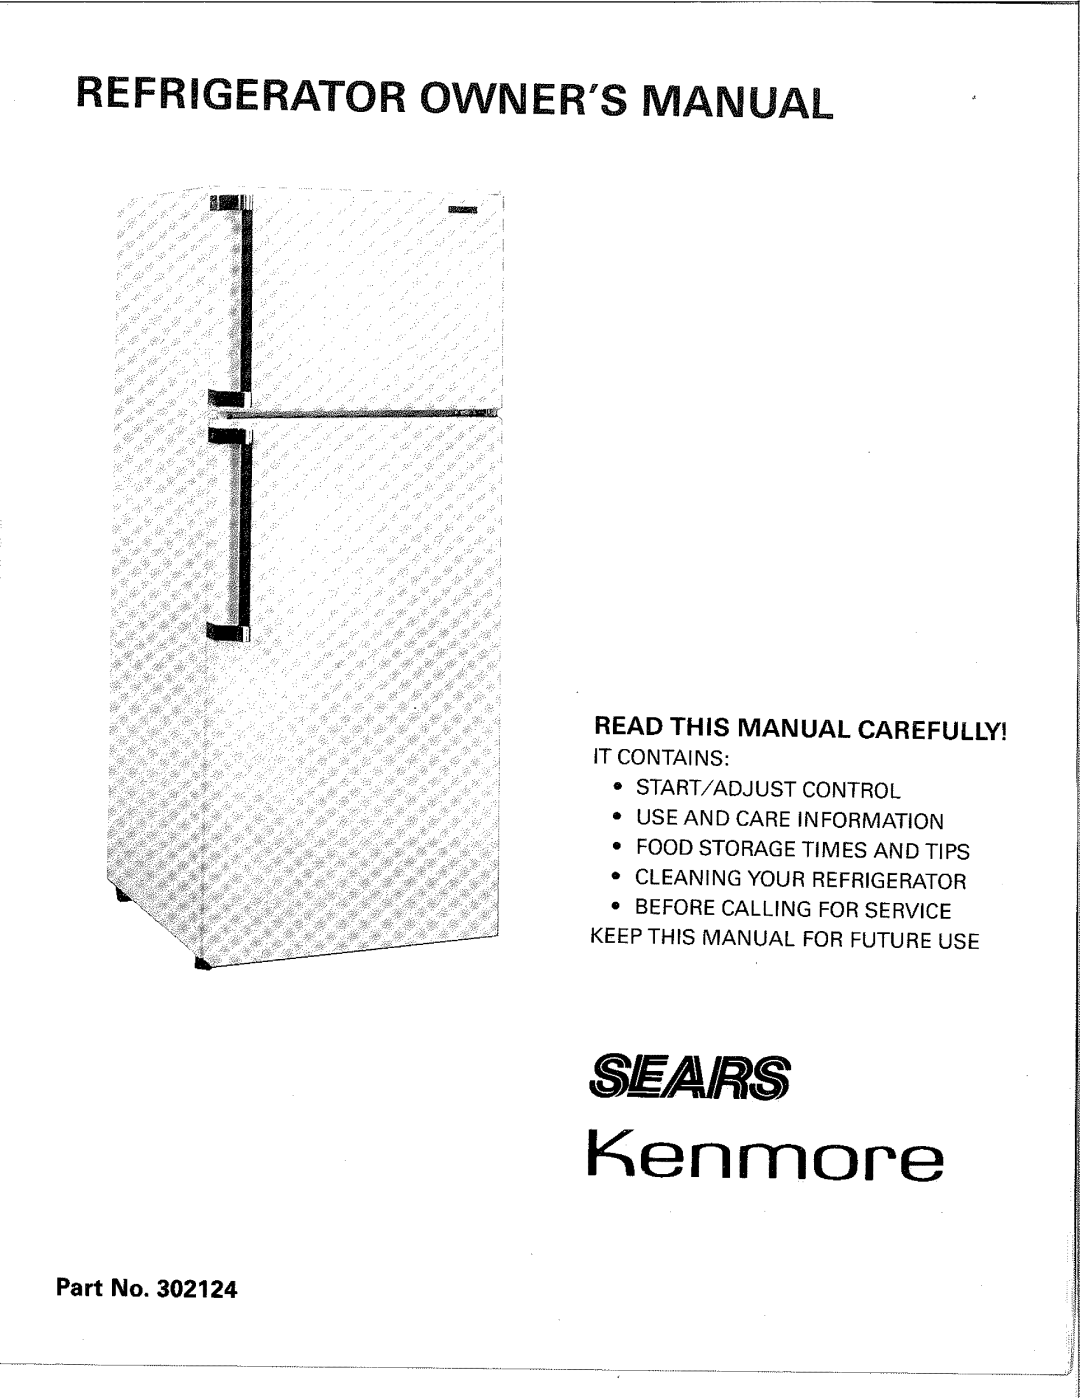 Sears 302124 owner manual Read This Manual Carefully, Kenmore, It Contains Start/Adjust Control, Use And Care Information 